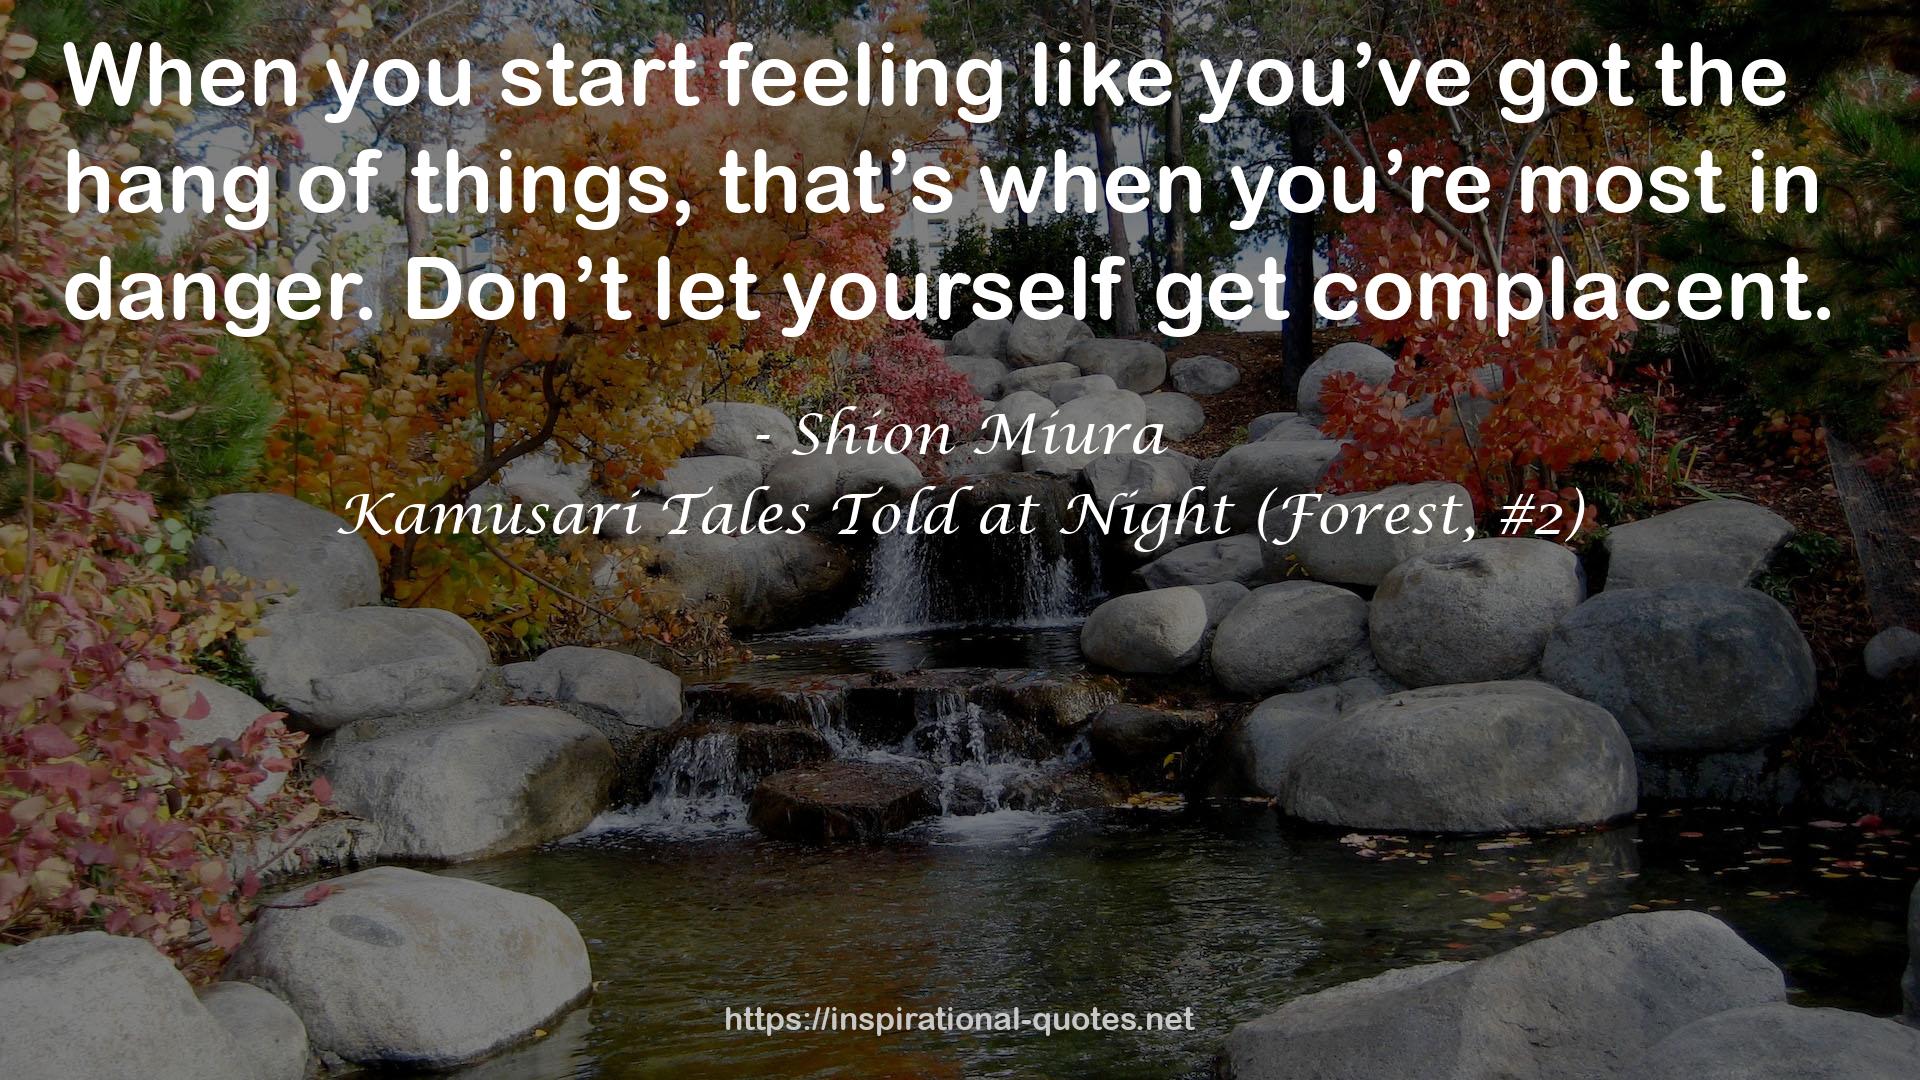 Kamusari Tales Told at Night (Forest, #2) QUOTES